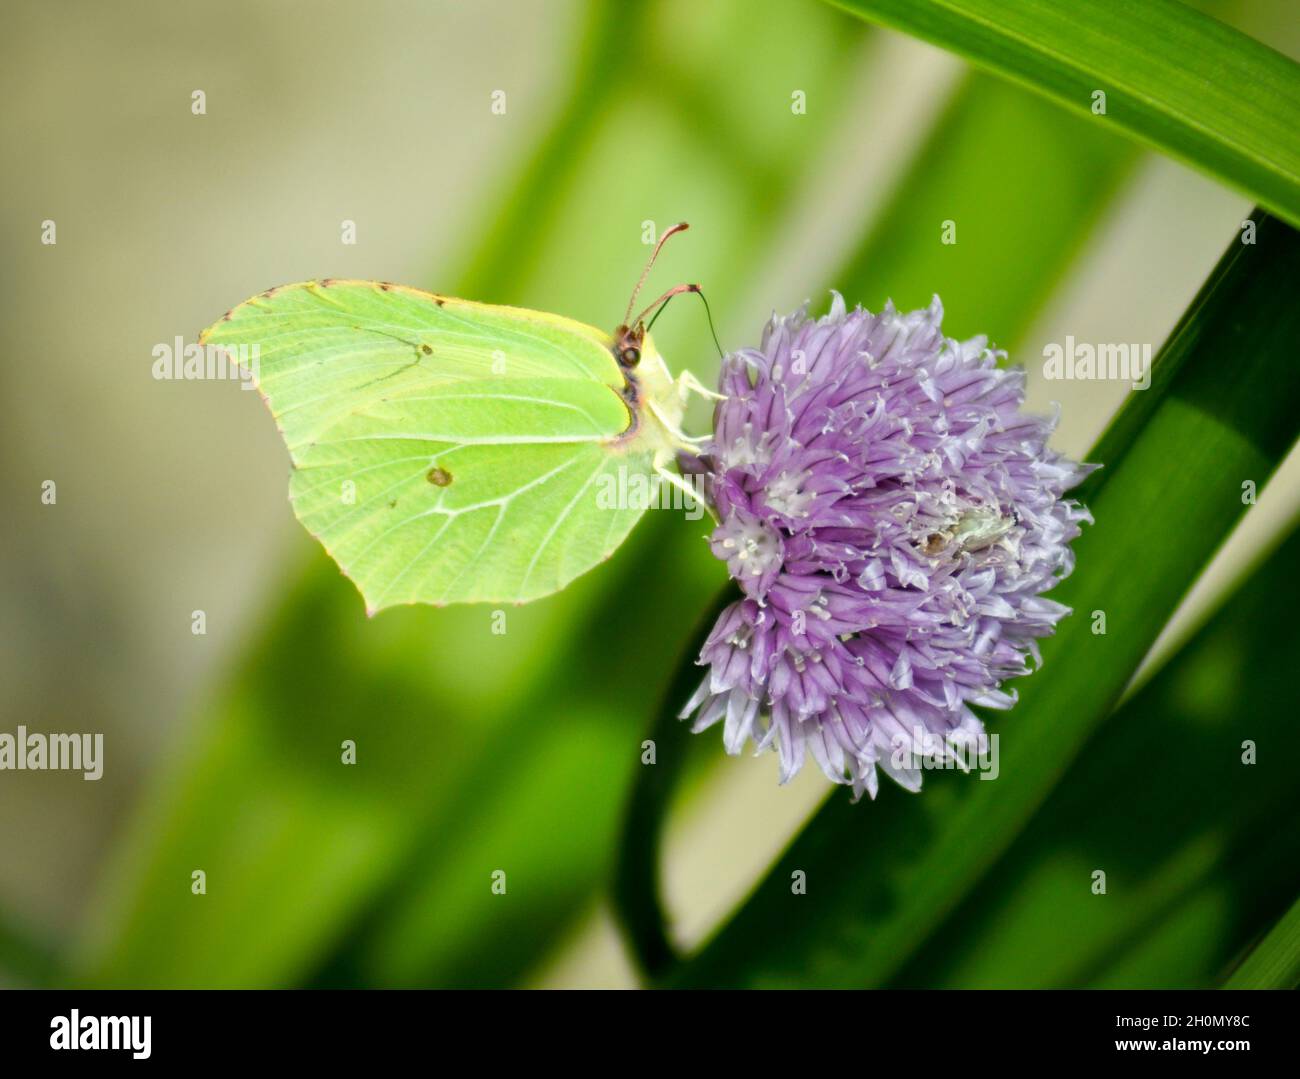 The Common Brimstone Butterfly - (Gonepteryx rhamni) feeding on nectar from a purple chive flower in a garden - East Yorkshire, England Stock Photo